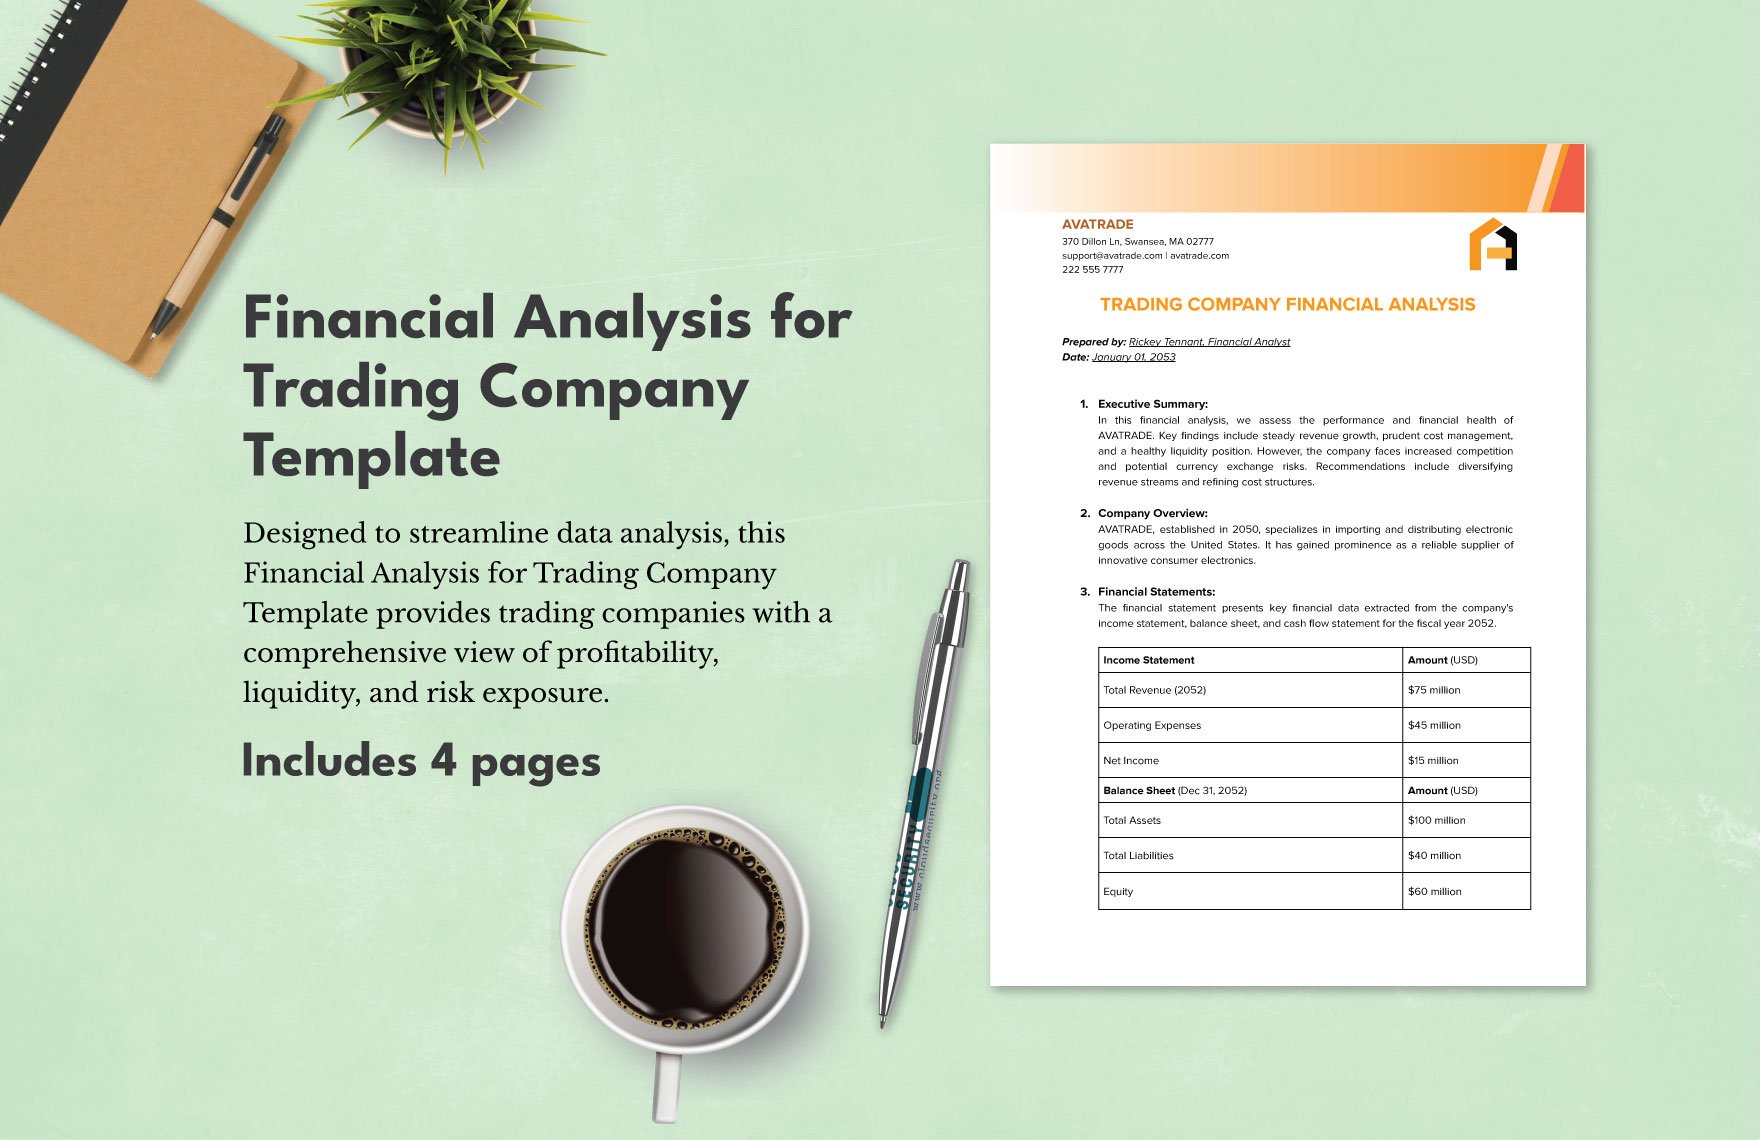 Financial Analysis for Trading Company Template